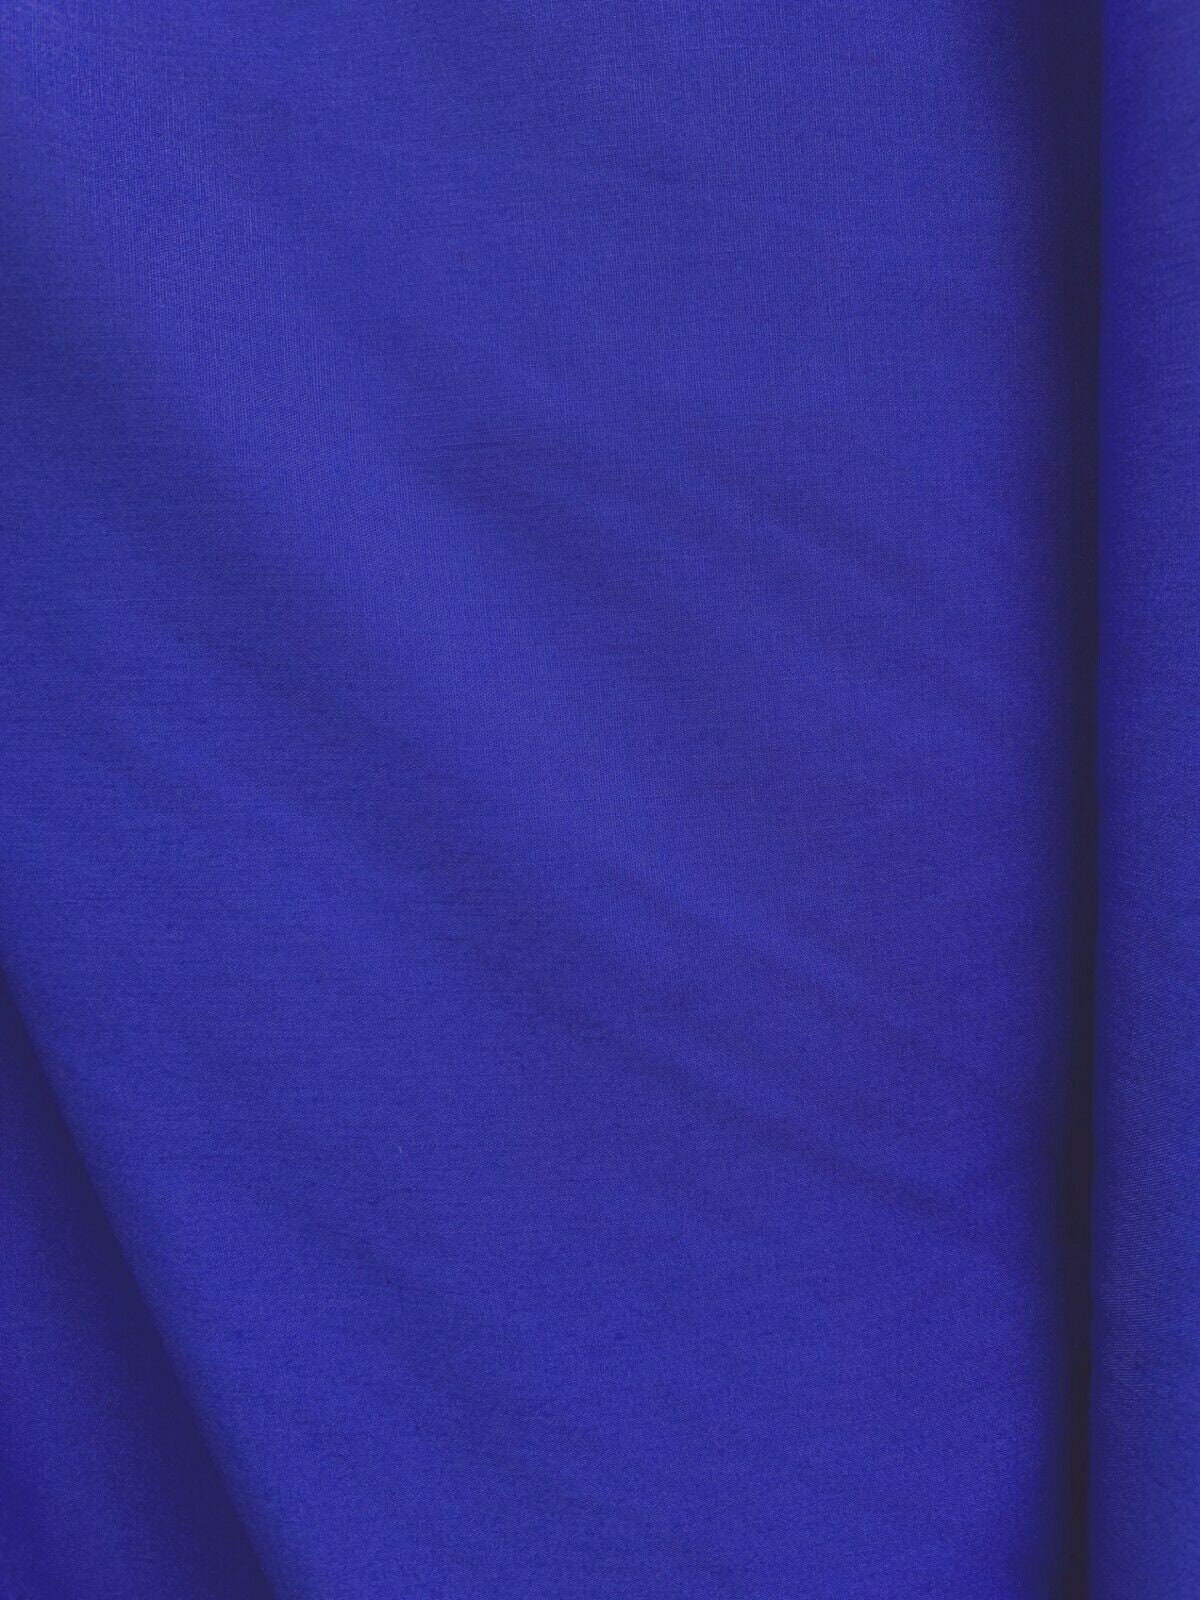 ROYAL BLUE Light Weight Cotton Fabric 58 In. Sold by the Yard -  Canada